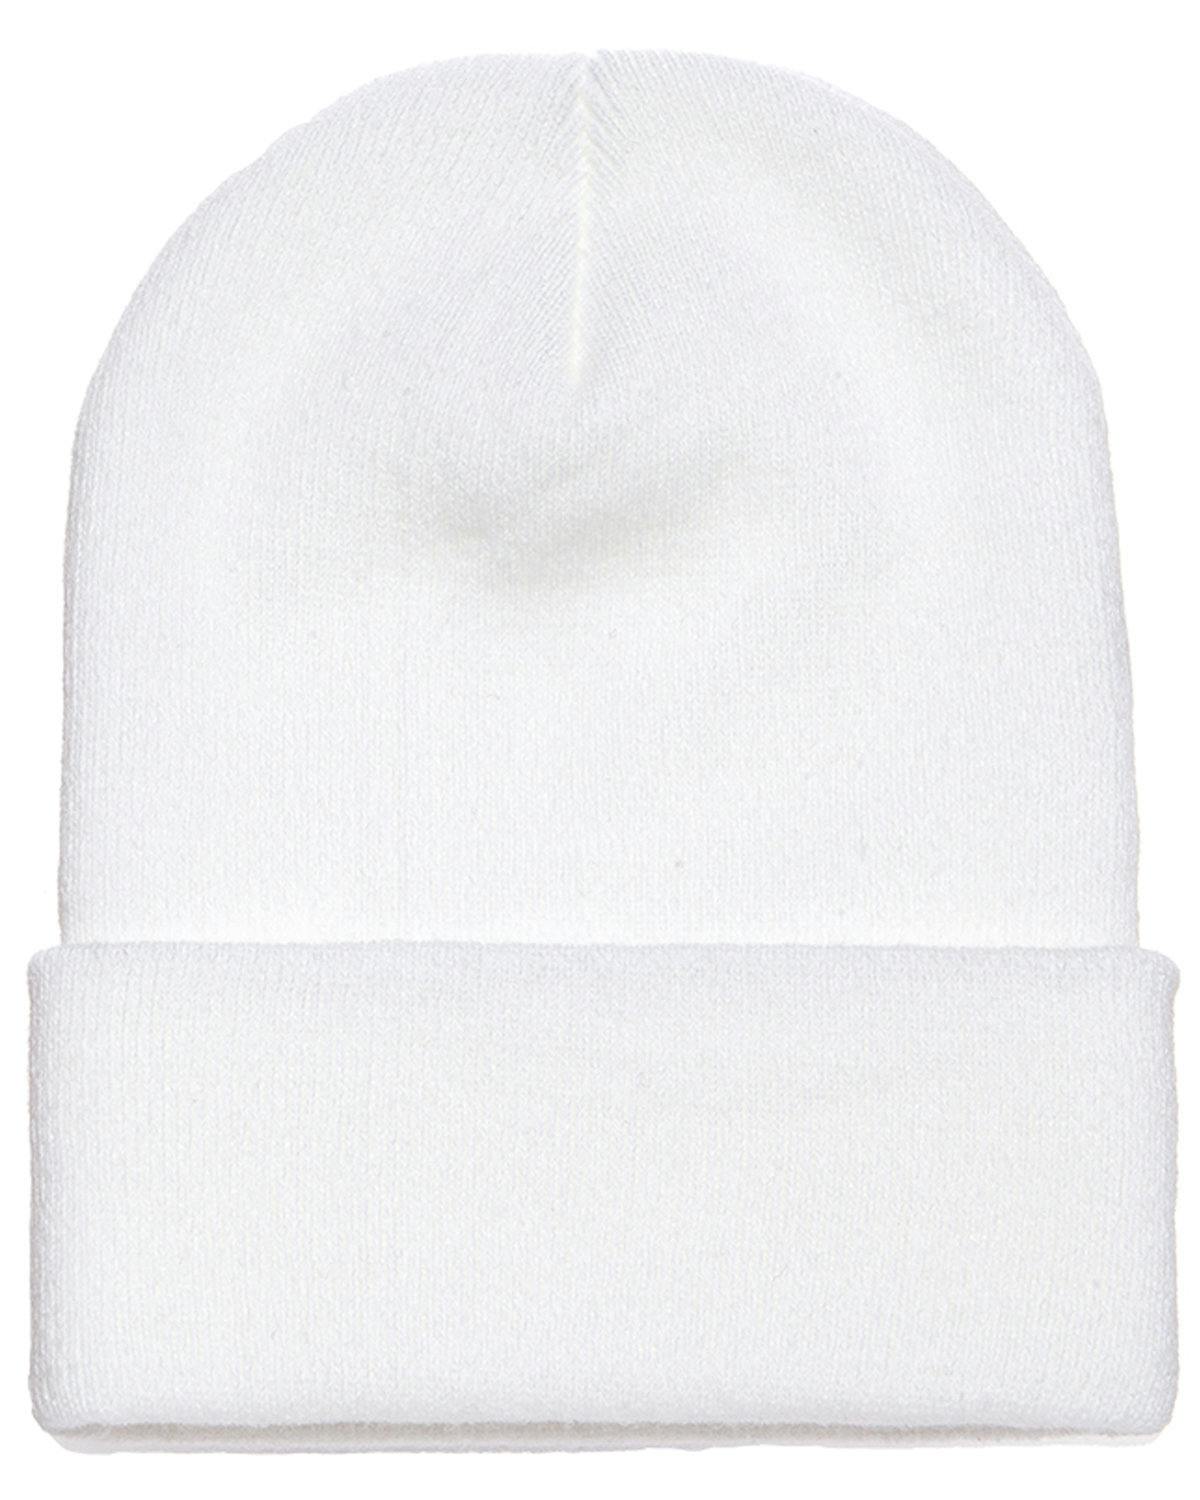 Image for Adult Cuffed Knit Beanie